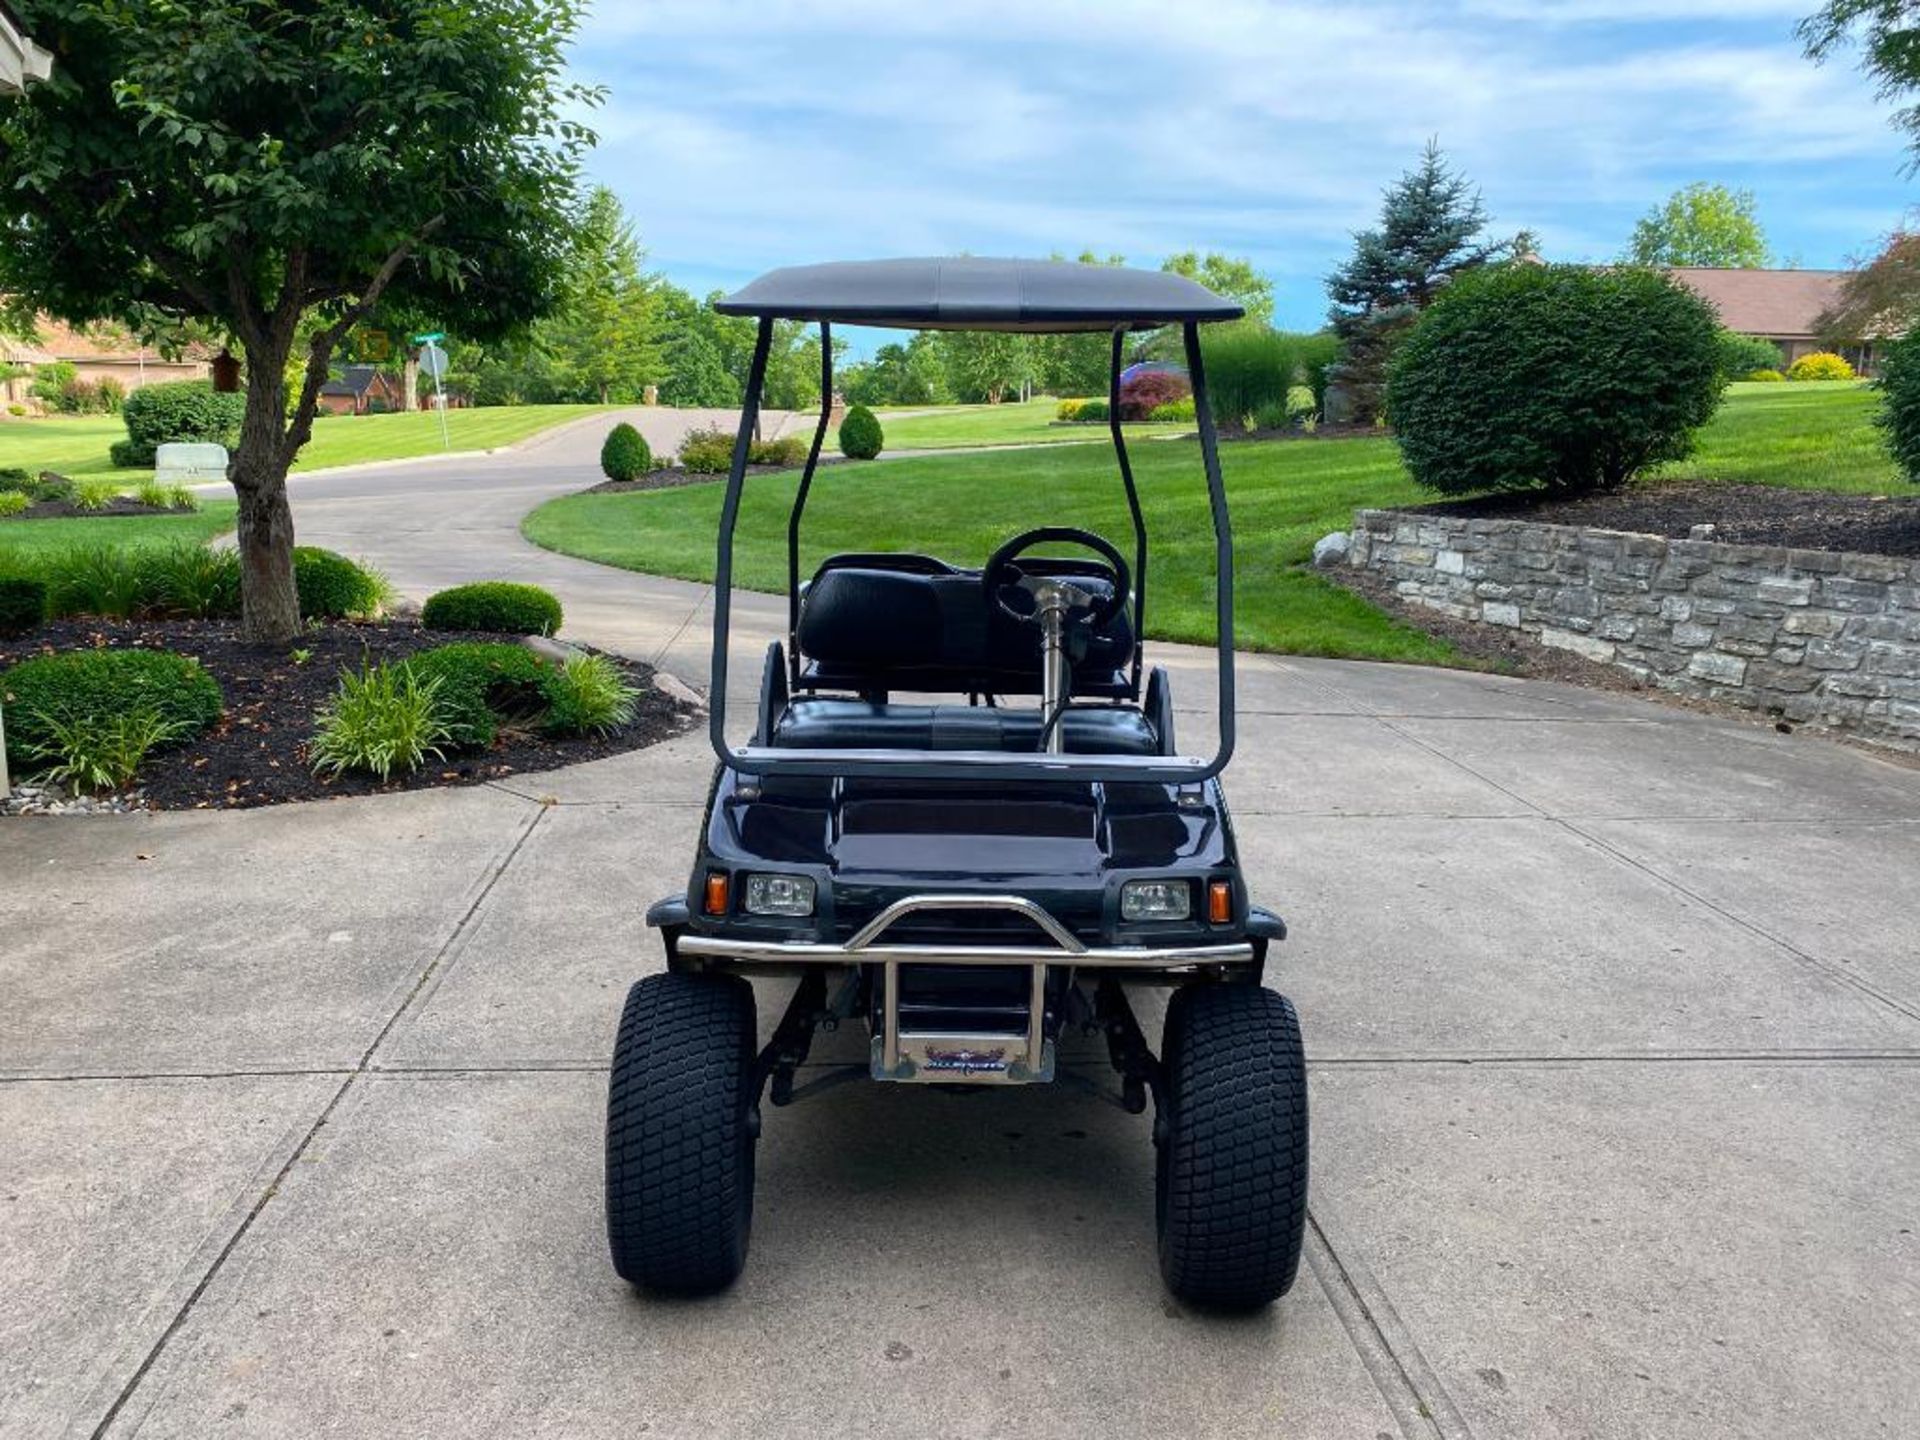 CLUB CAR ELECTRIC GOLF CART, BATTERIES LESS THAN A YEAR OLD, 48V, ALL SPORTS LIFT KIT, AFTERMARKET W - Image 2 of 6